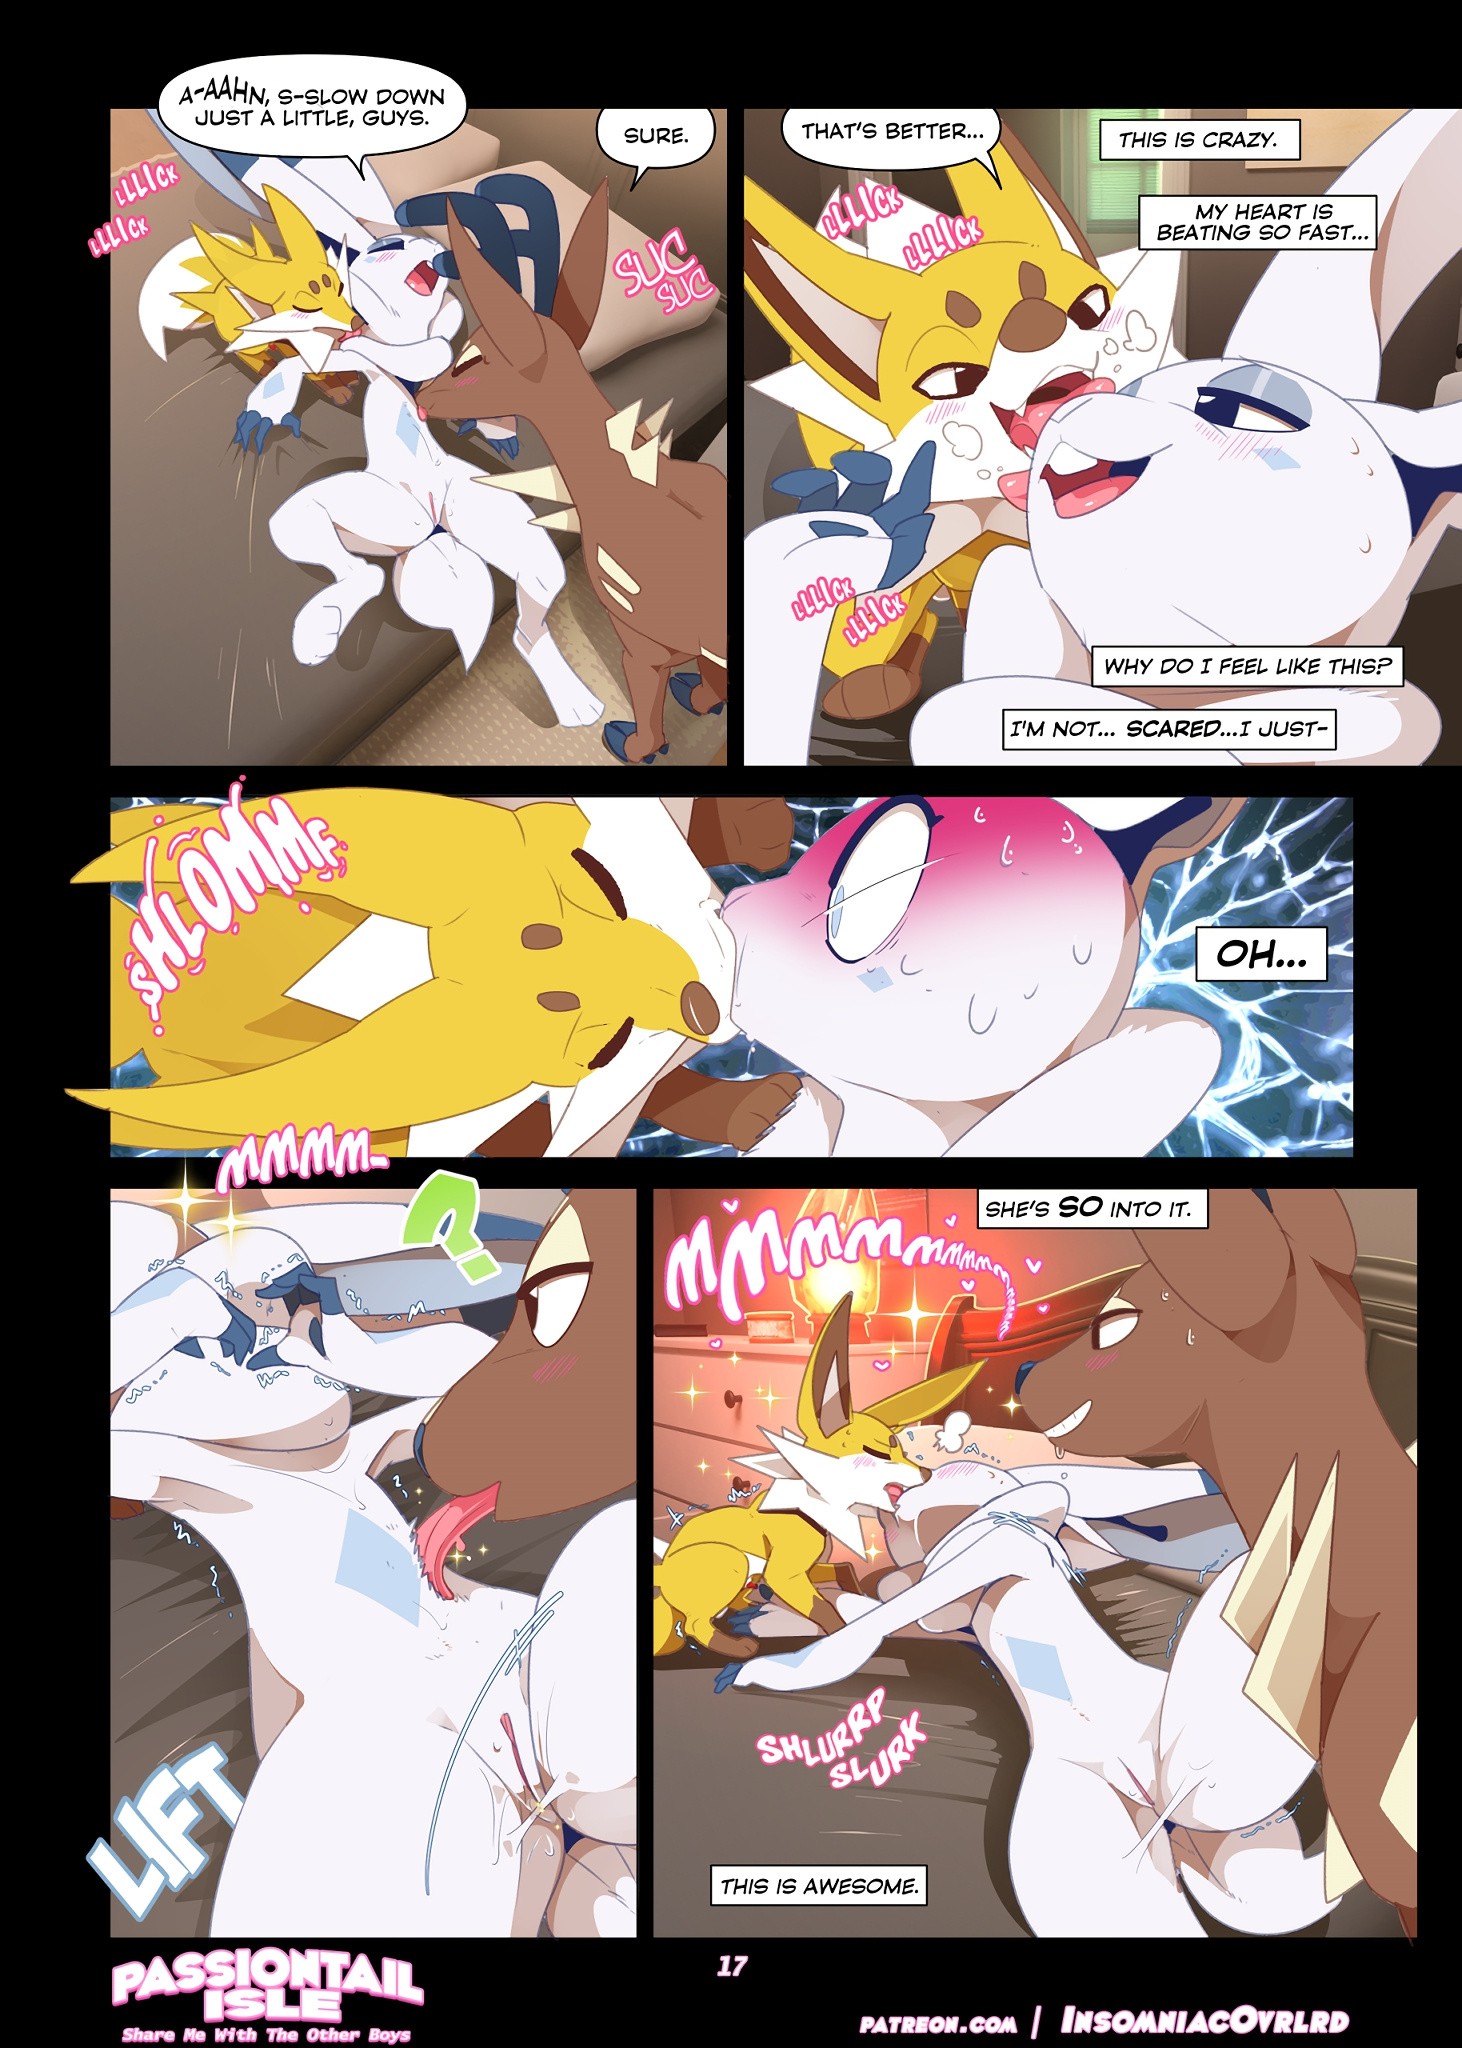 Passiontail Isle: Share Me With The Other Boys porn comic picture 17